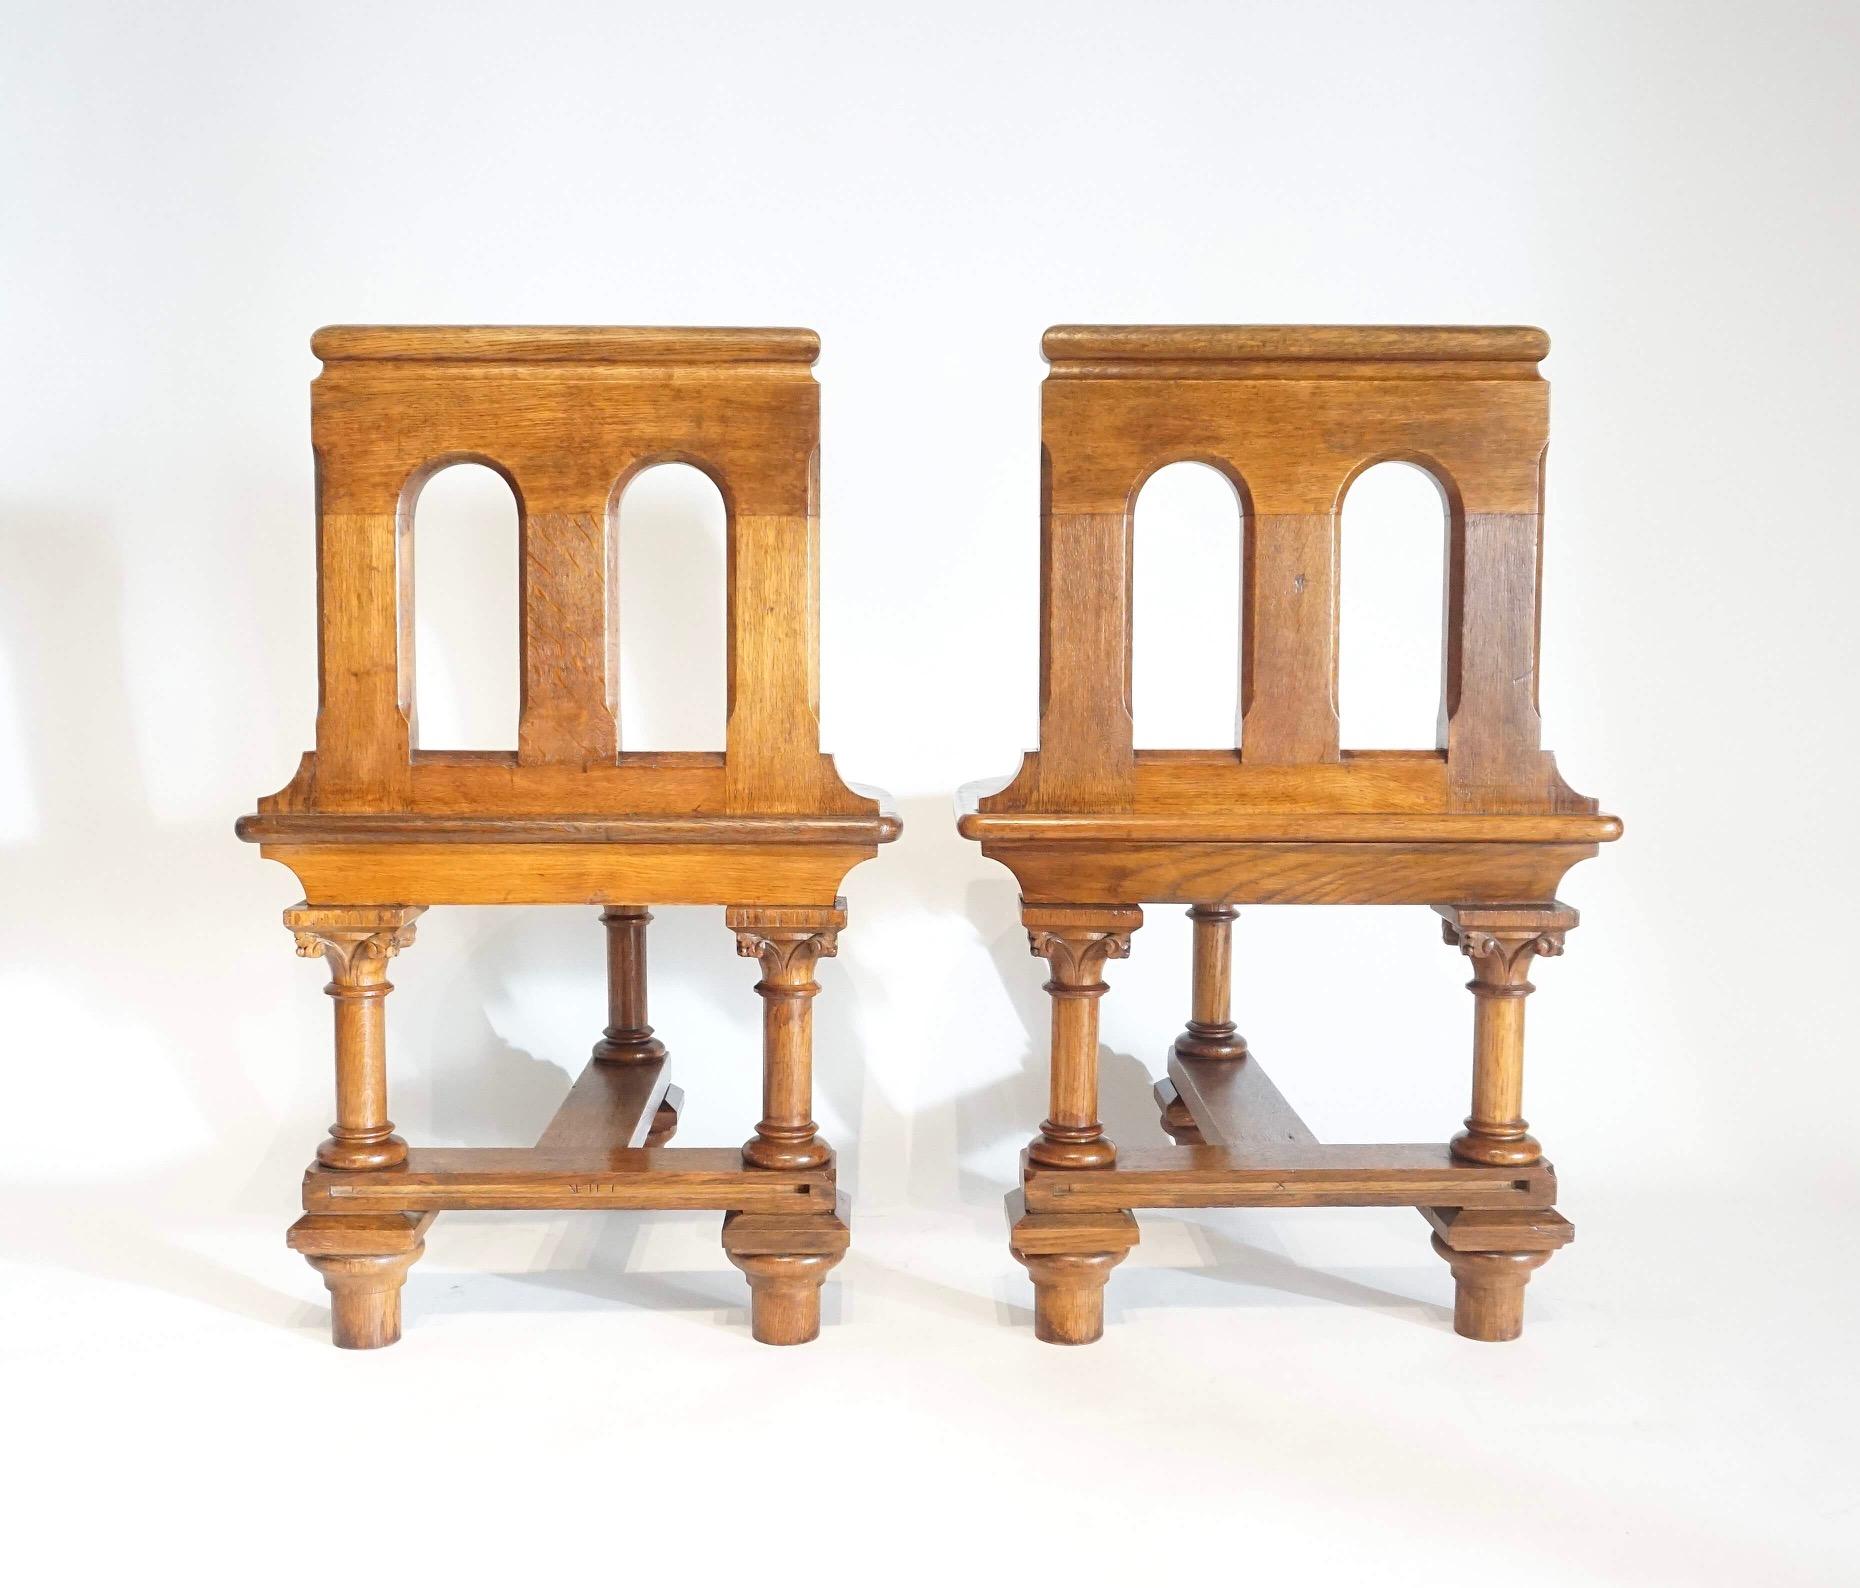 Hand-Carved French Romanesque Revival Oak Hall Seats or Chairs, circa 1900 For Sale